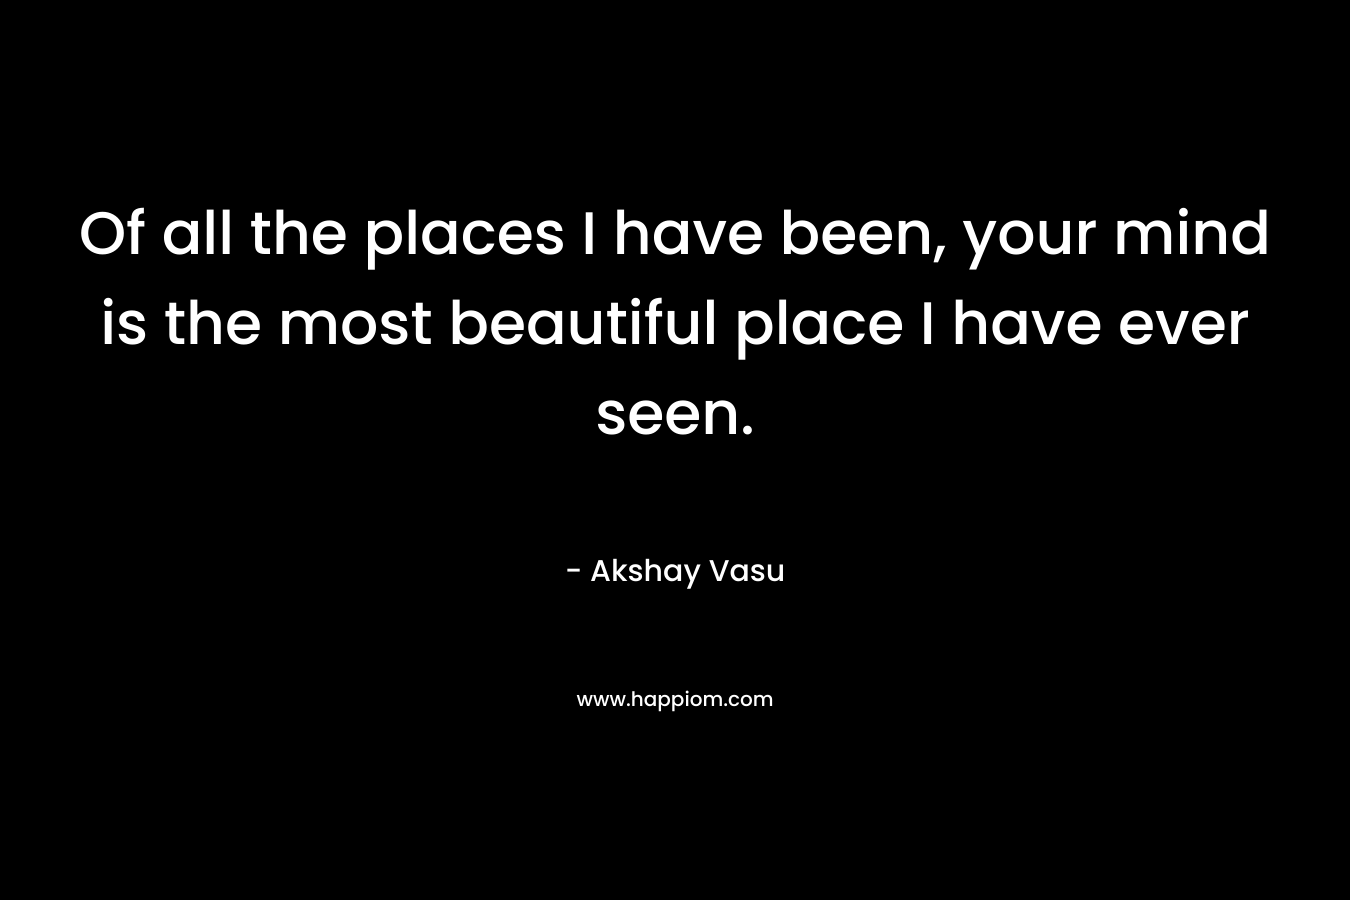 Of all the places I have been, your mind is the most beautiful place I have ever seen.